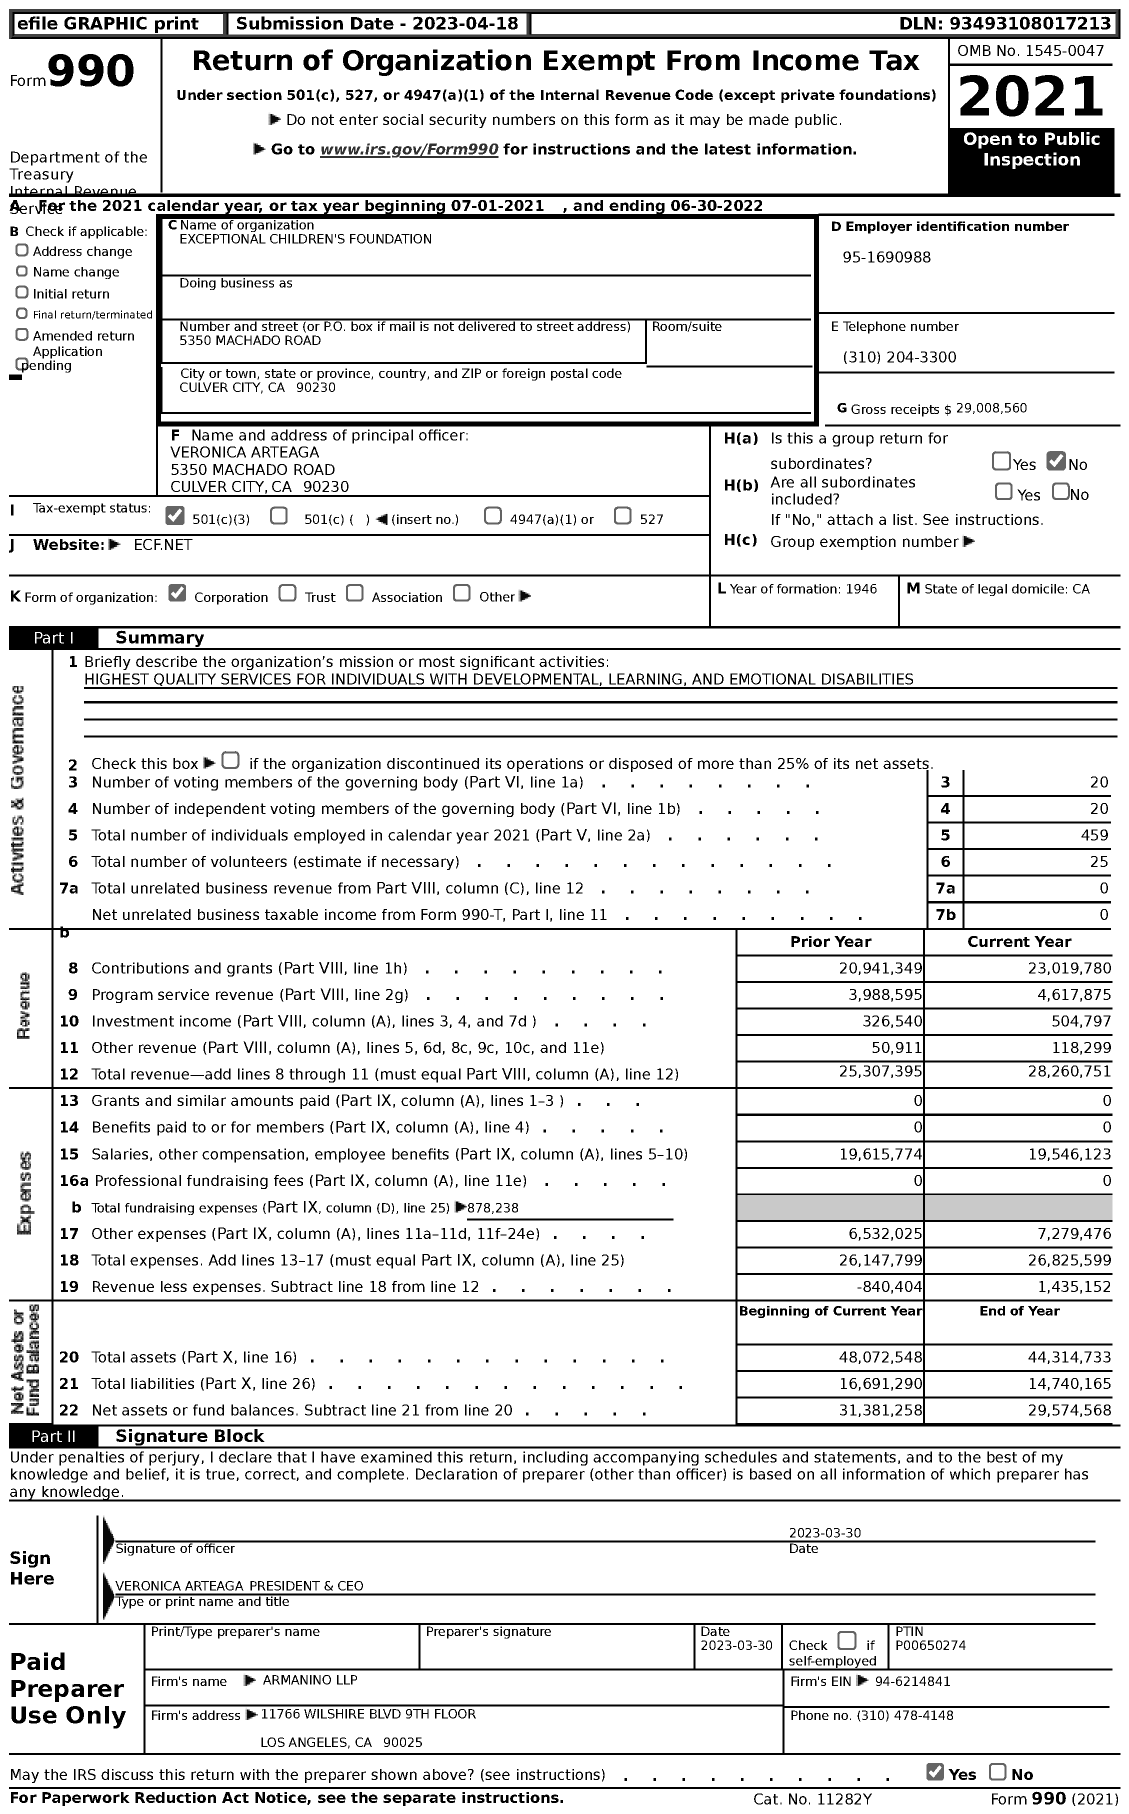 Image of first page of 2021 Form 990 for Exceptional Children's Foundation (ECF)